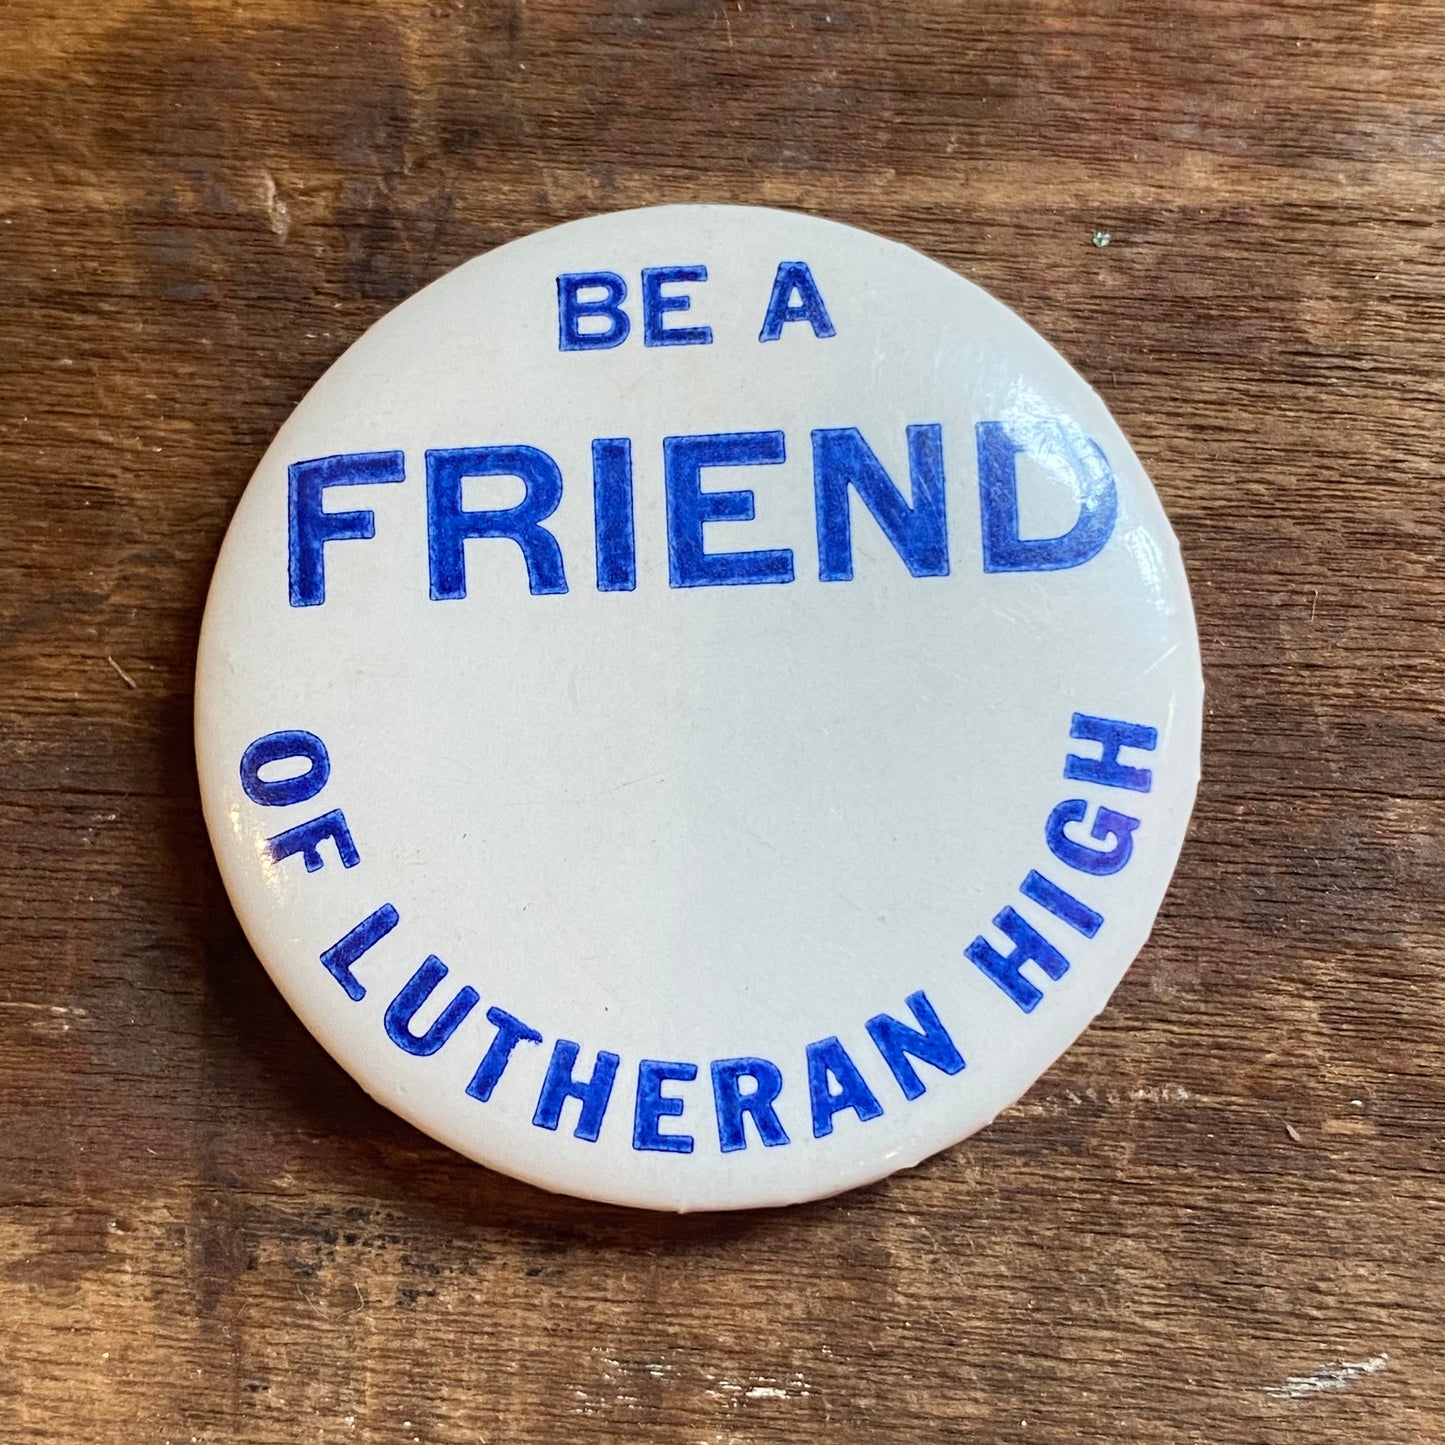 【USA vintage】缶バッジ BE A FRIEND